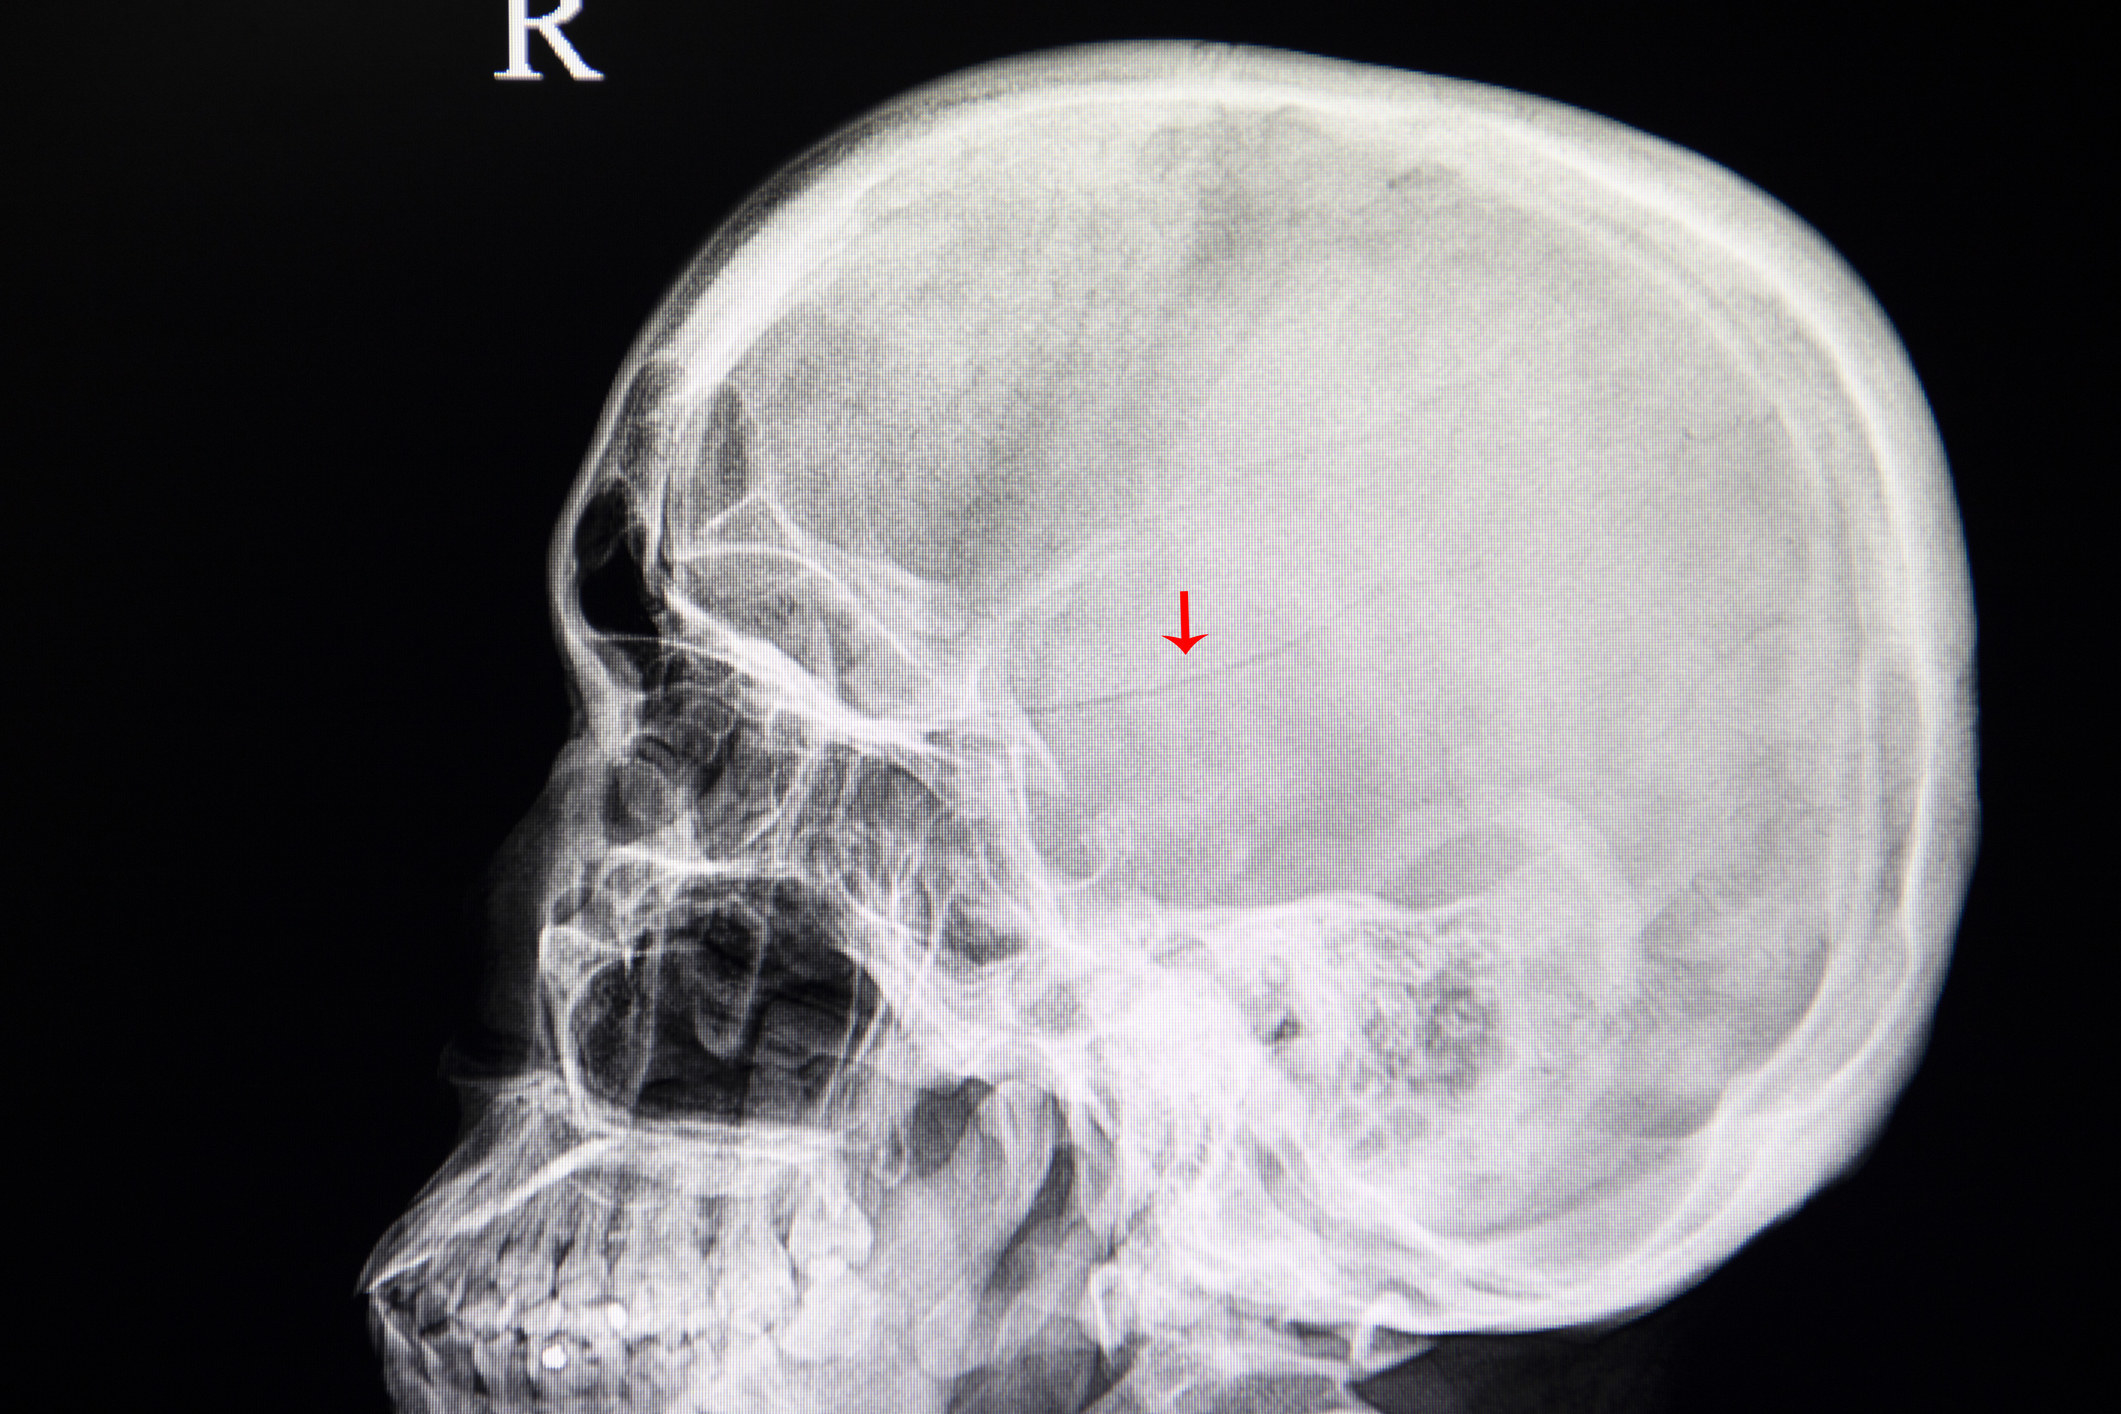 X-ray of a skull fracture